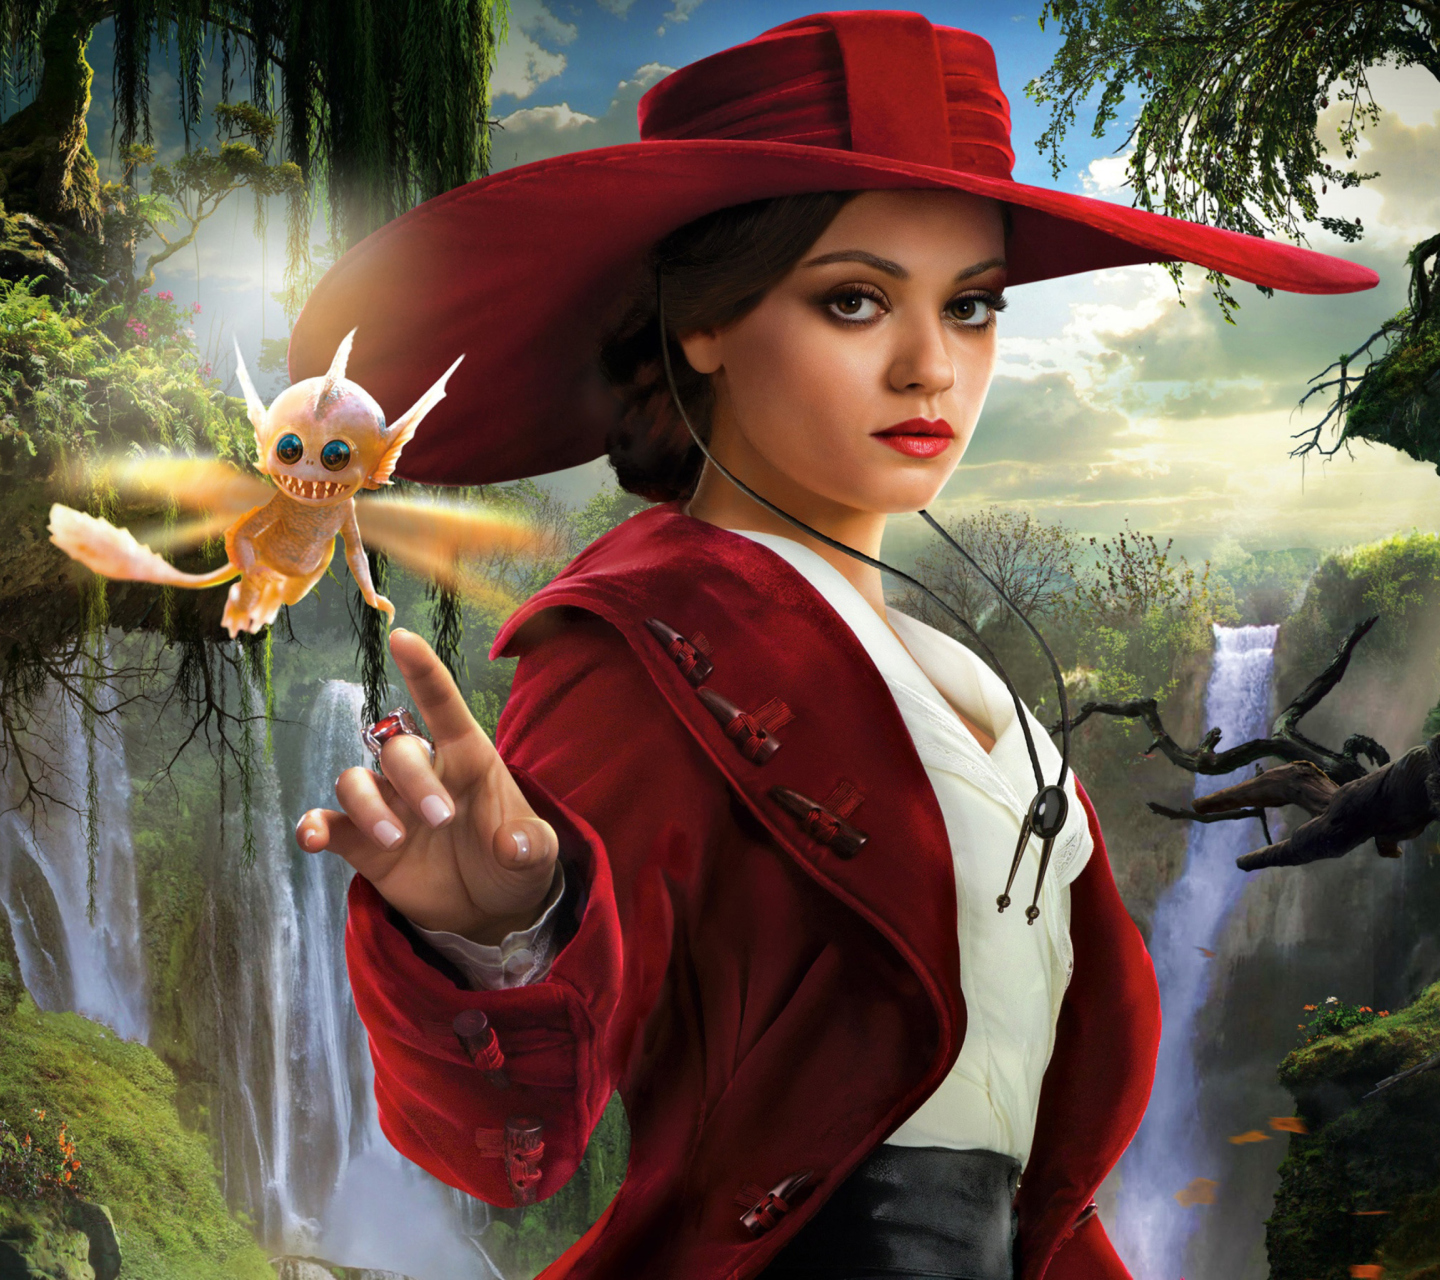 Mila Kunis In Oz The Great And Powerful screenshot #1 1440x1280